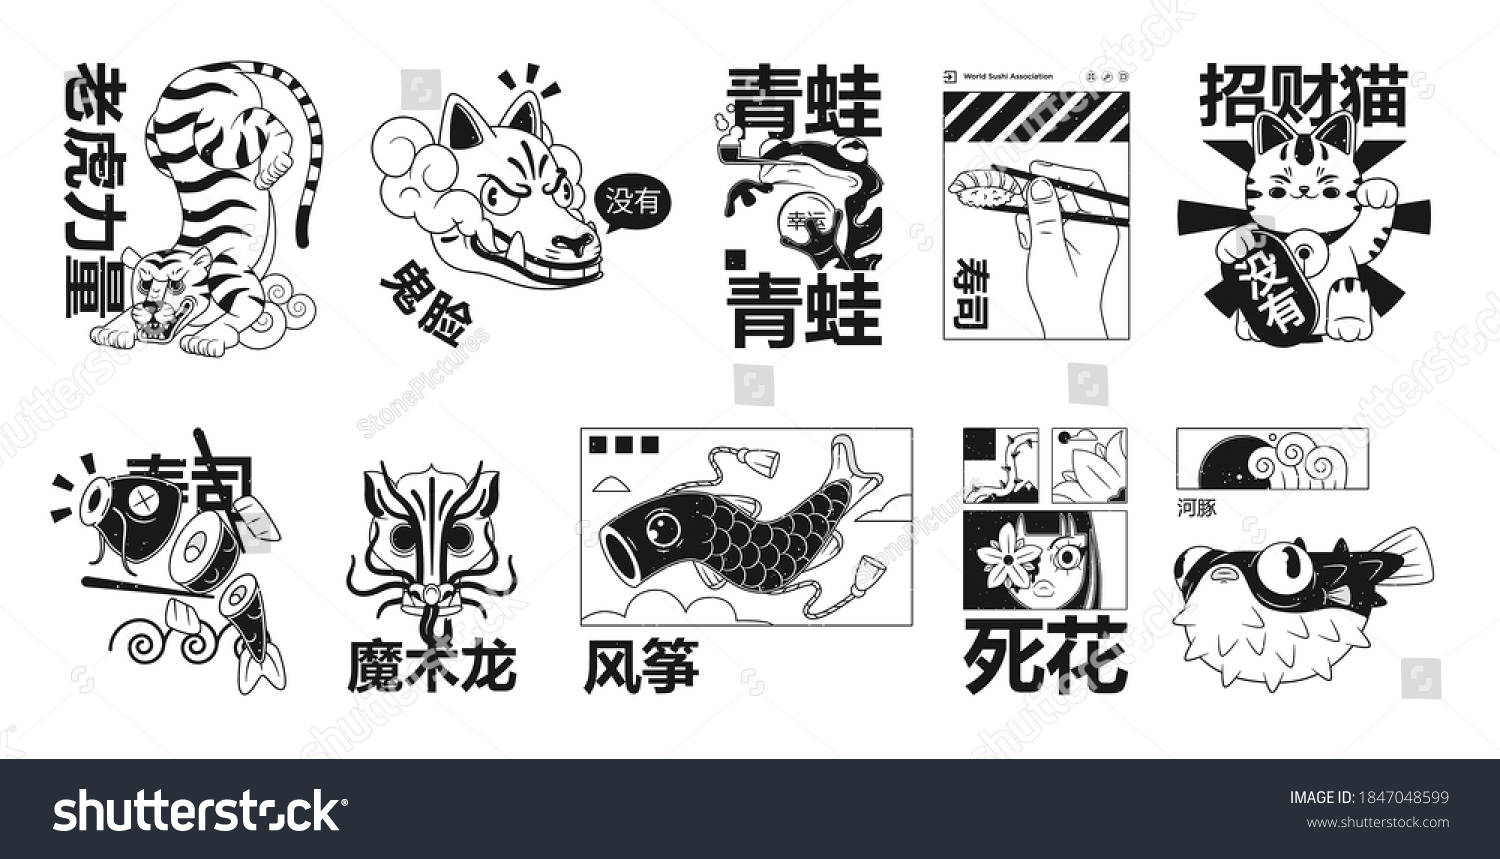 SVG of Illustration of cooking fish in traditional asian style. Ideal for oriental restaurant or souvenirs. Hieroglyphs translation: sushi, lucky cat, pufferfish, kite,frog,luck,dead flower,grimace, svg